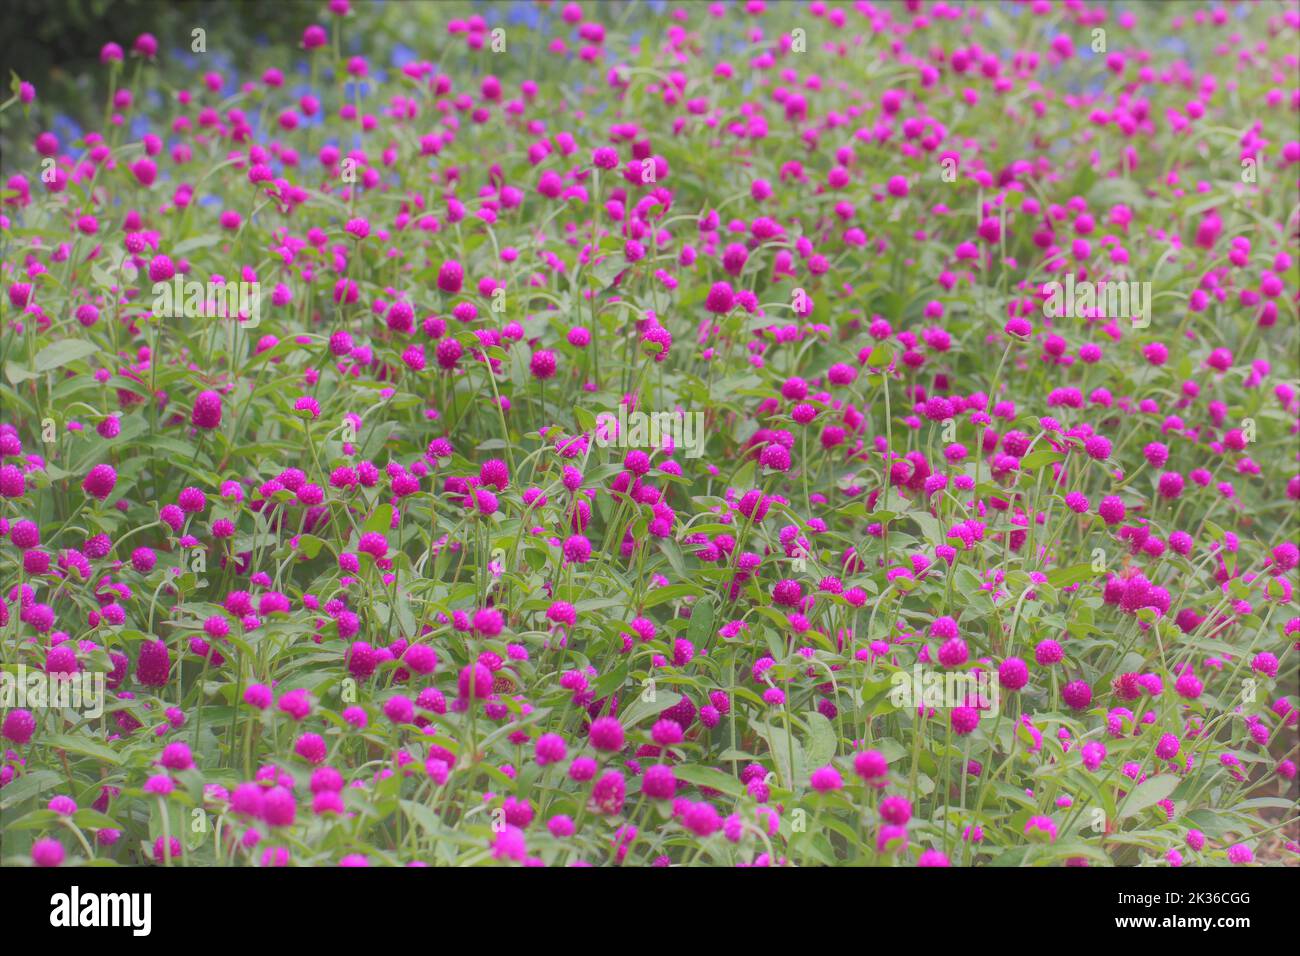 A field full of globe amaranths (Gomphrena) for scenic background Stock Photo